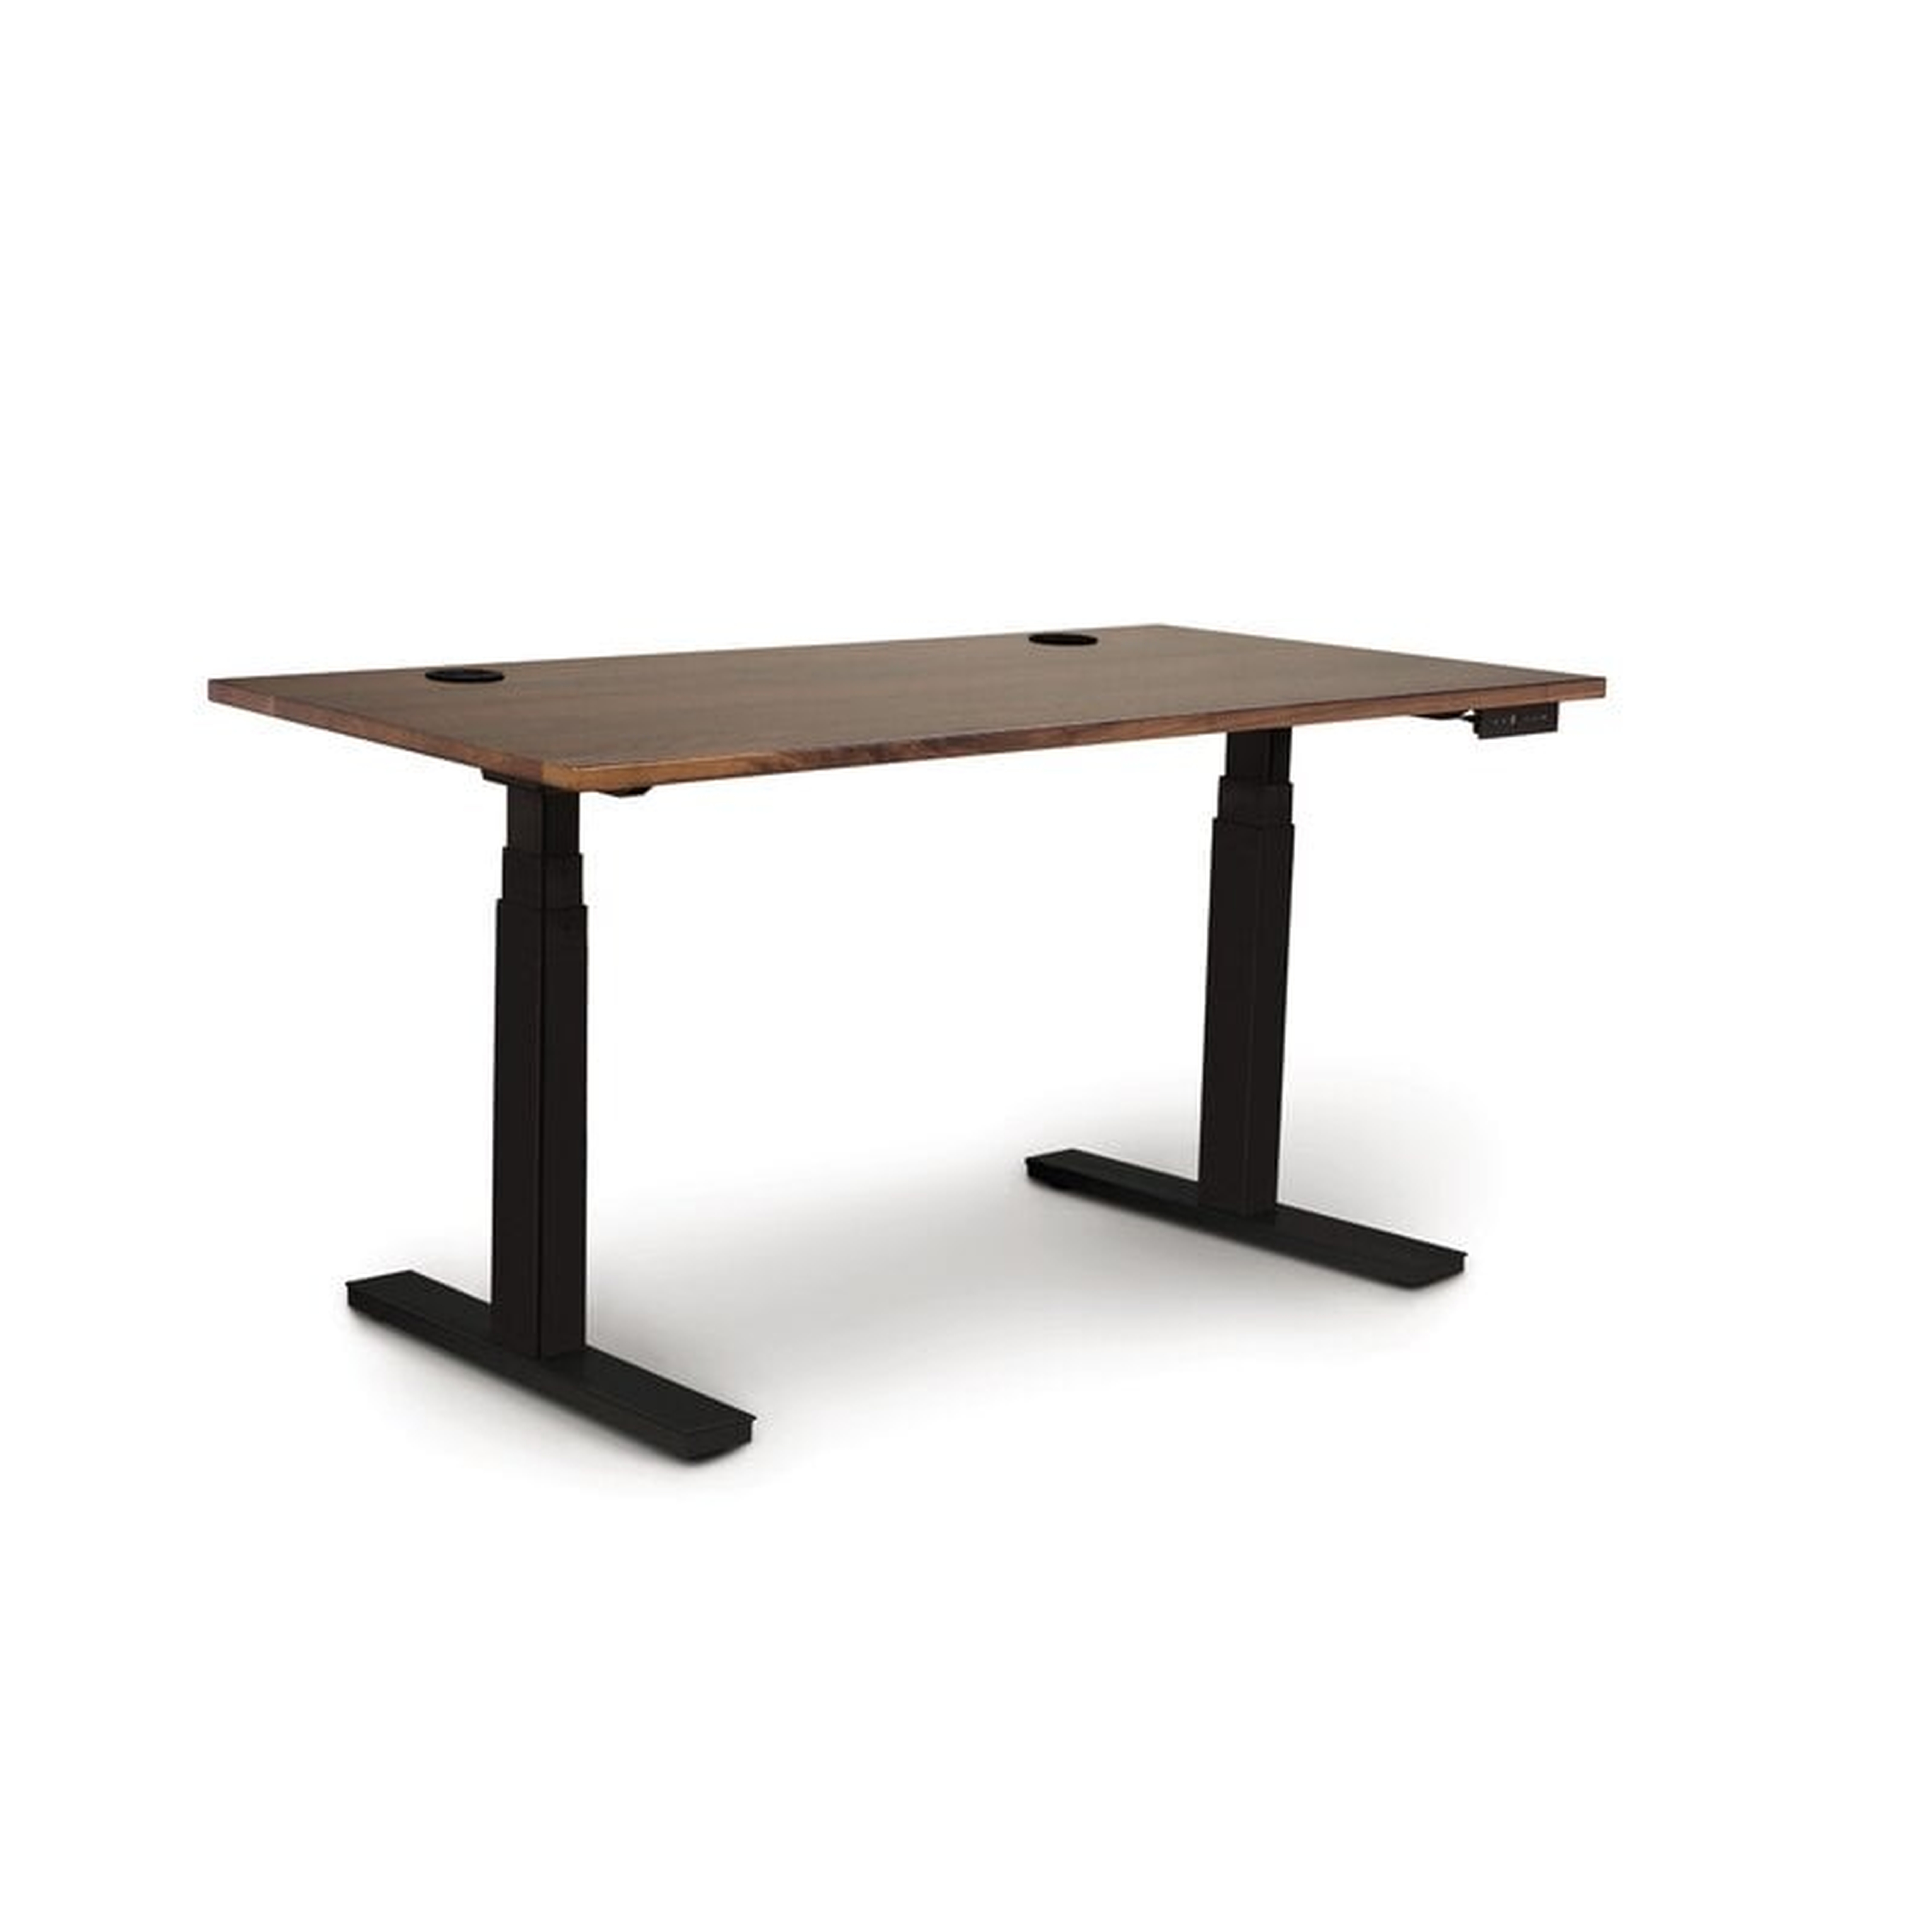 Copeland Furniture Invigo Height Adjustable Standing Desk with Built in Outlets - Perigold